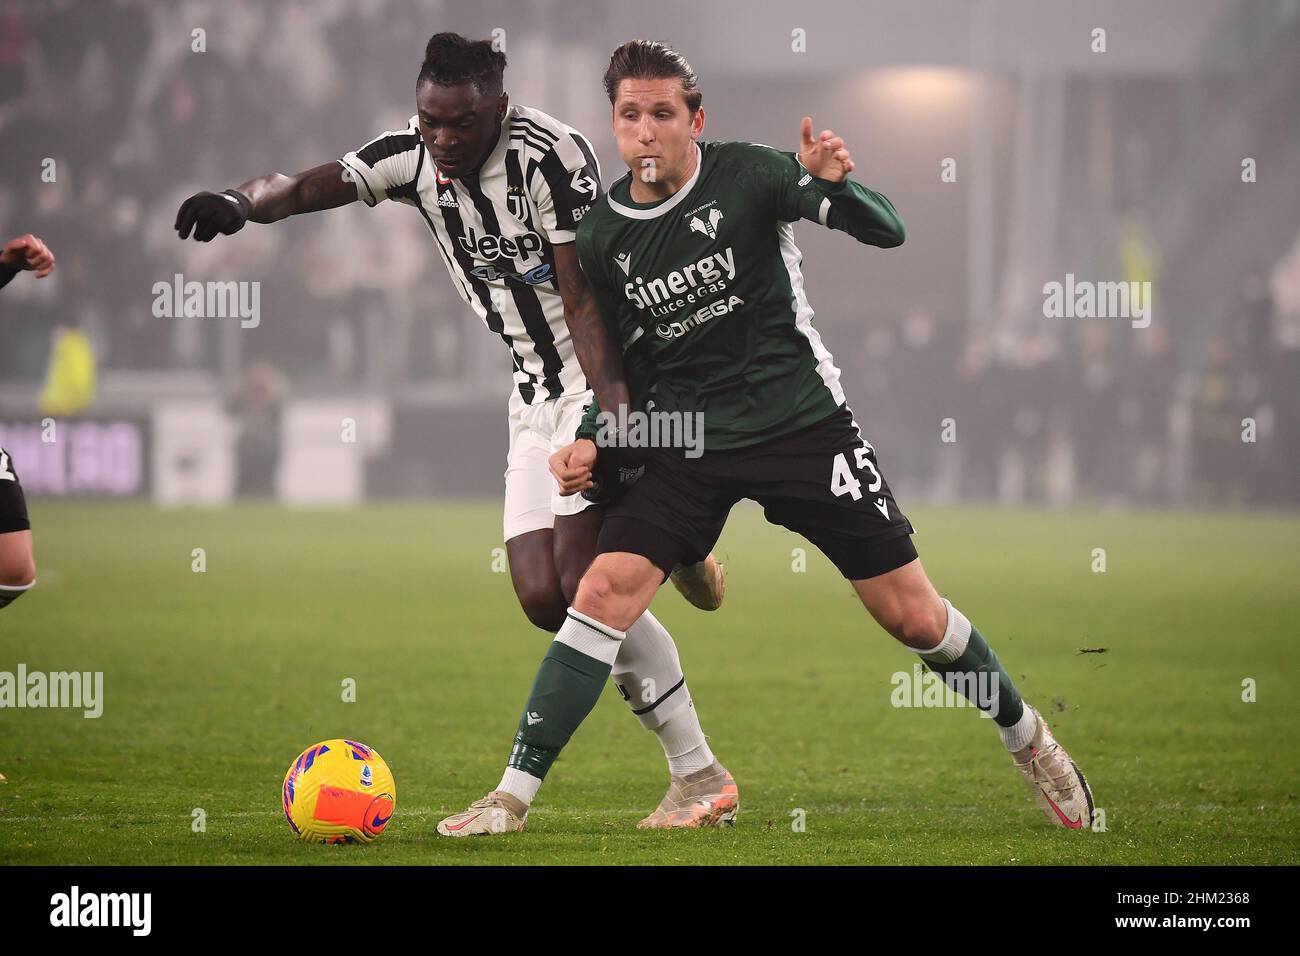 Torino, Italy. 06th Feb, 2022. Moise Kean of Juventus FC and Panagiotis Retsos of Hellas Verona compete for the ball during the Serie A 2021/2022 football match between Juventus FC and Hellas Verona at Juventus stadium in Torino (Italy), February 6th, 2022. Photo Federico Tardito/Insidefoto Credit: insidefoto srl/Alamy Live News Stock Photo